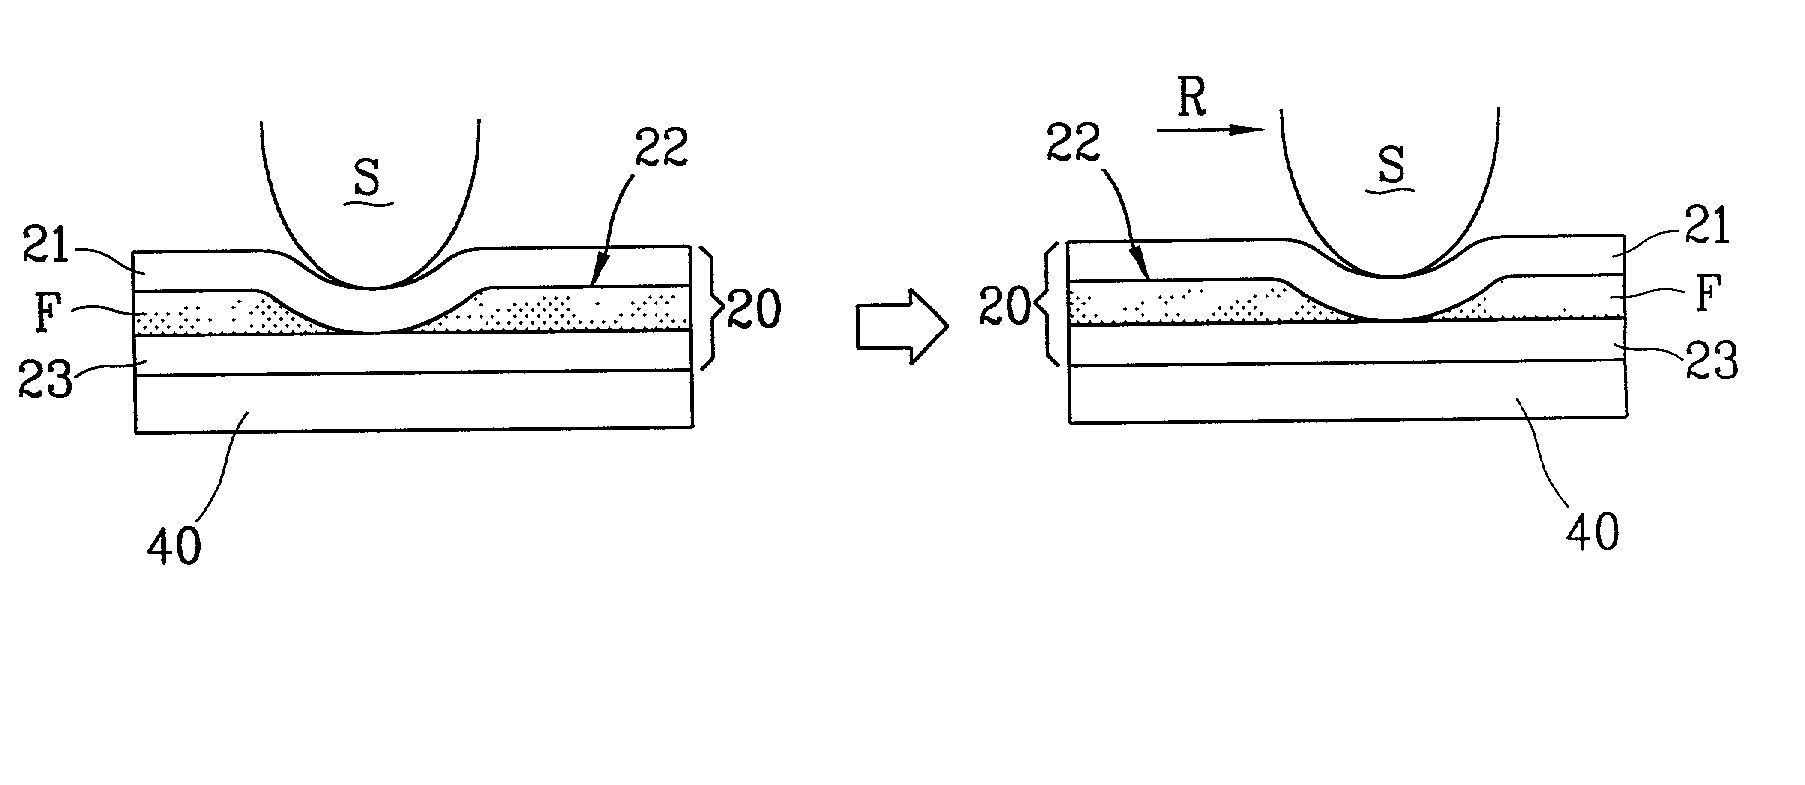 Handling and delivering fluid through a microchannel in an elastic substrate by progressively squeezing the microchannel along its length